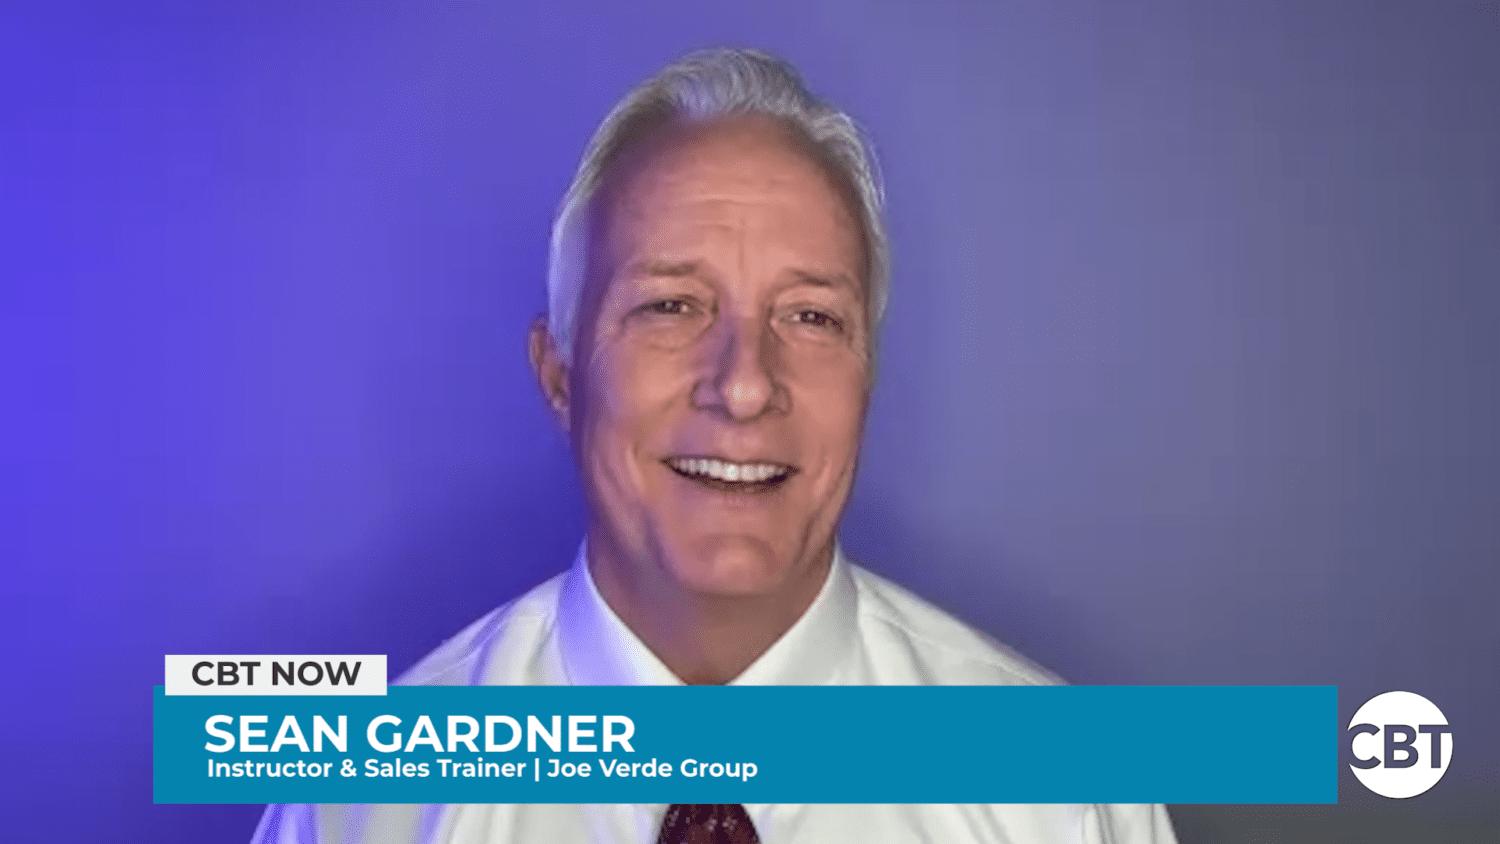 On the latest episode of CBT NOW, Sean Gardner joins us to share some effective techniques to help dealerships' sales teams close more deals.